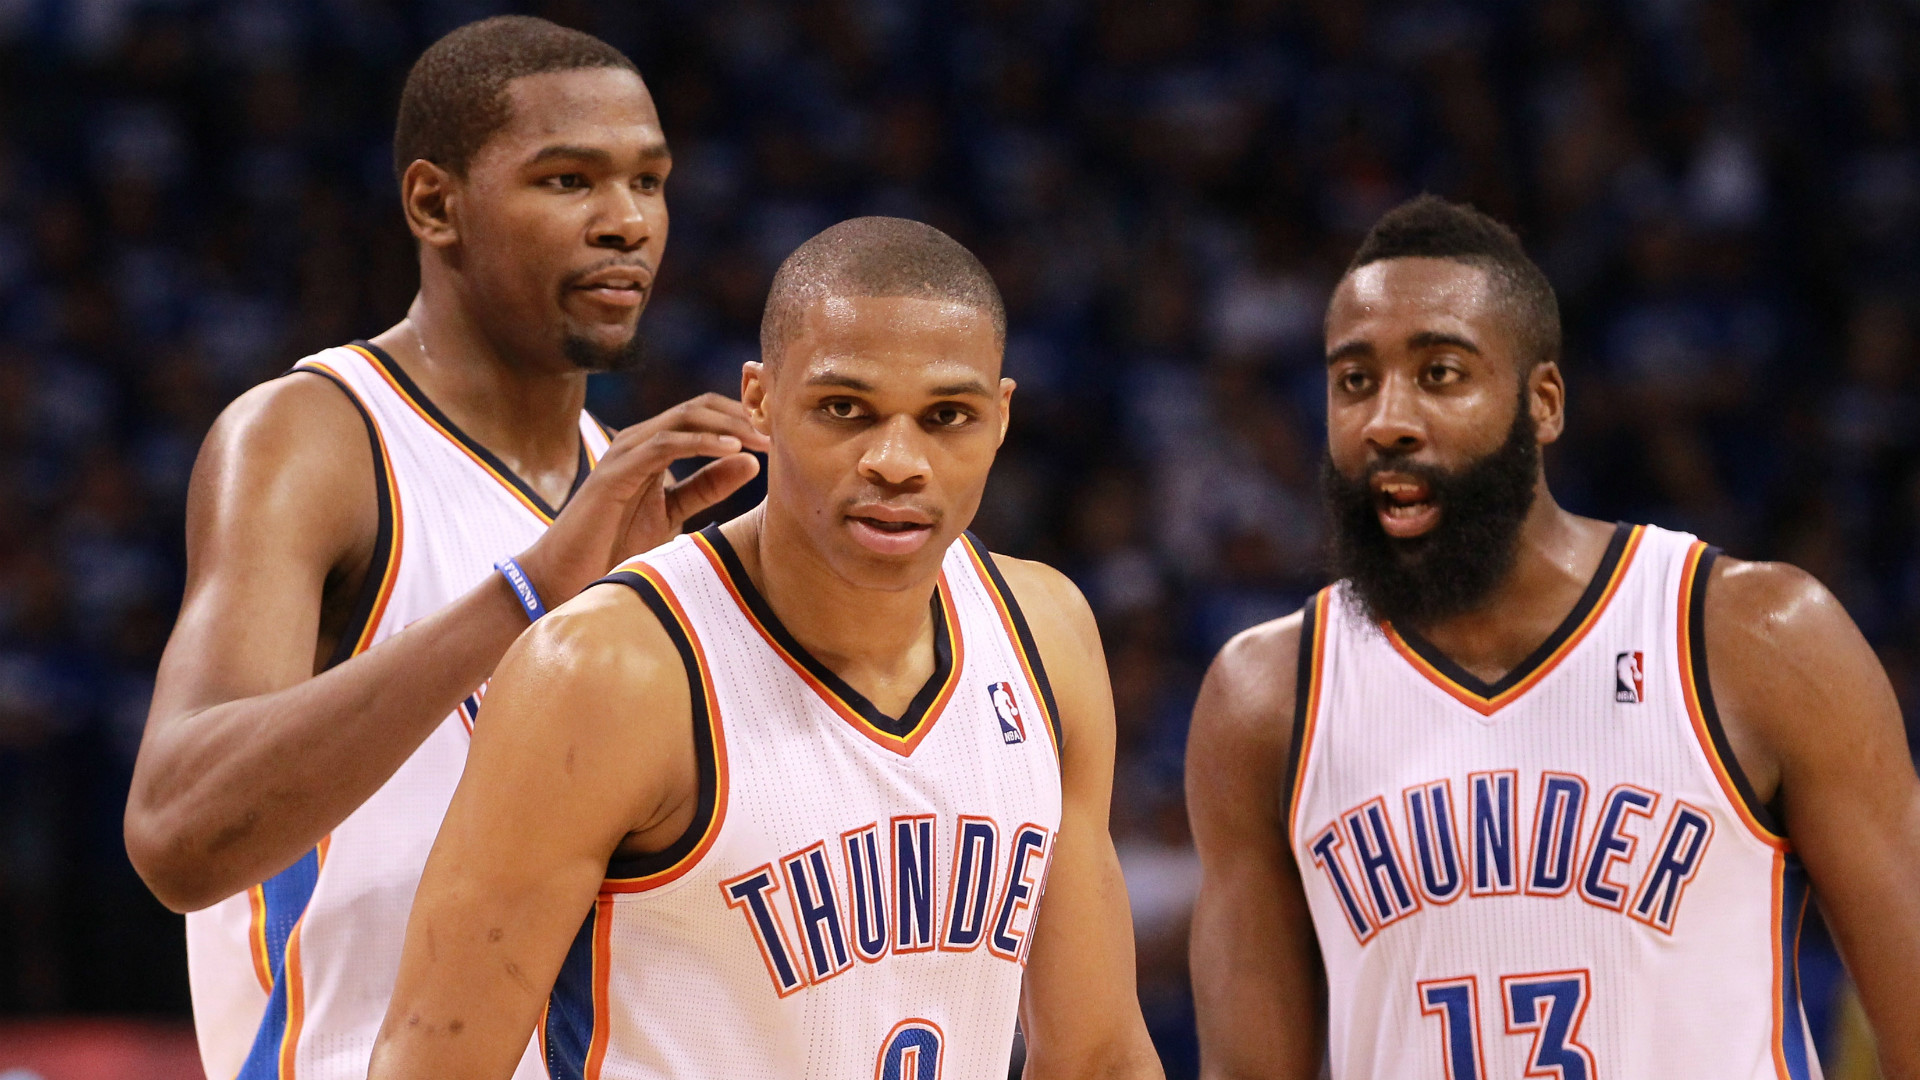 1920x1080 6 Who is the Thunder General Manager who drafted both Westbrook and Durant?